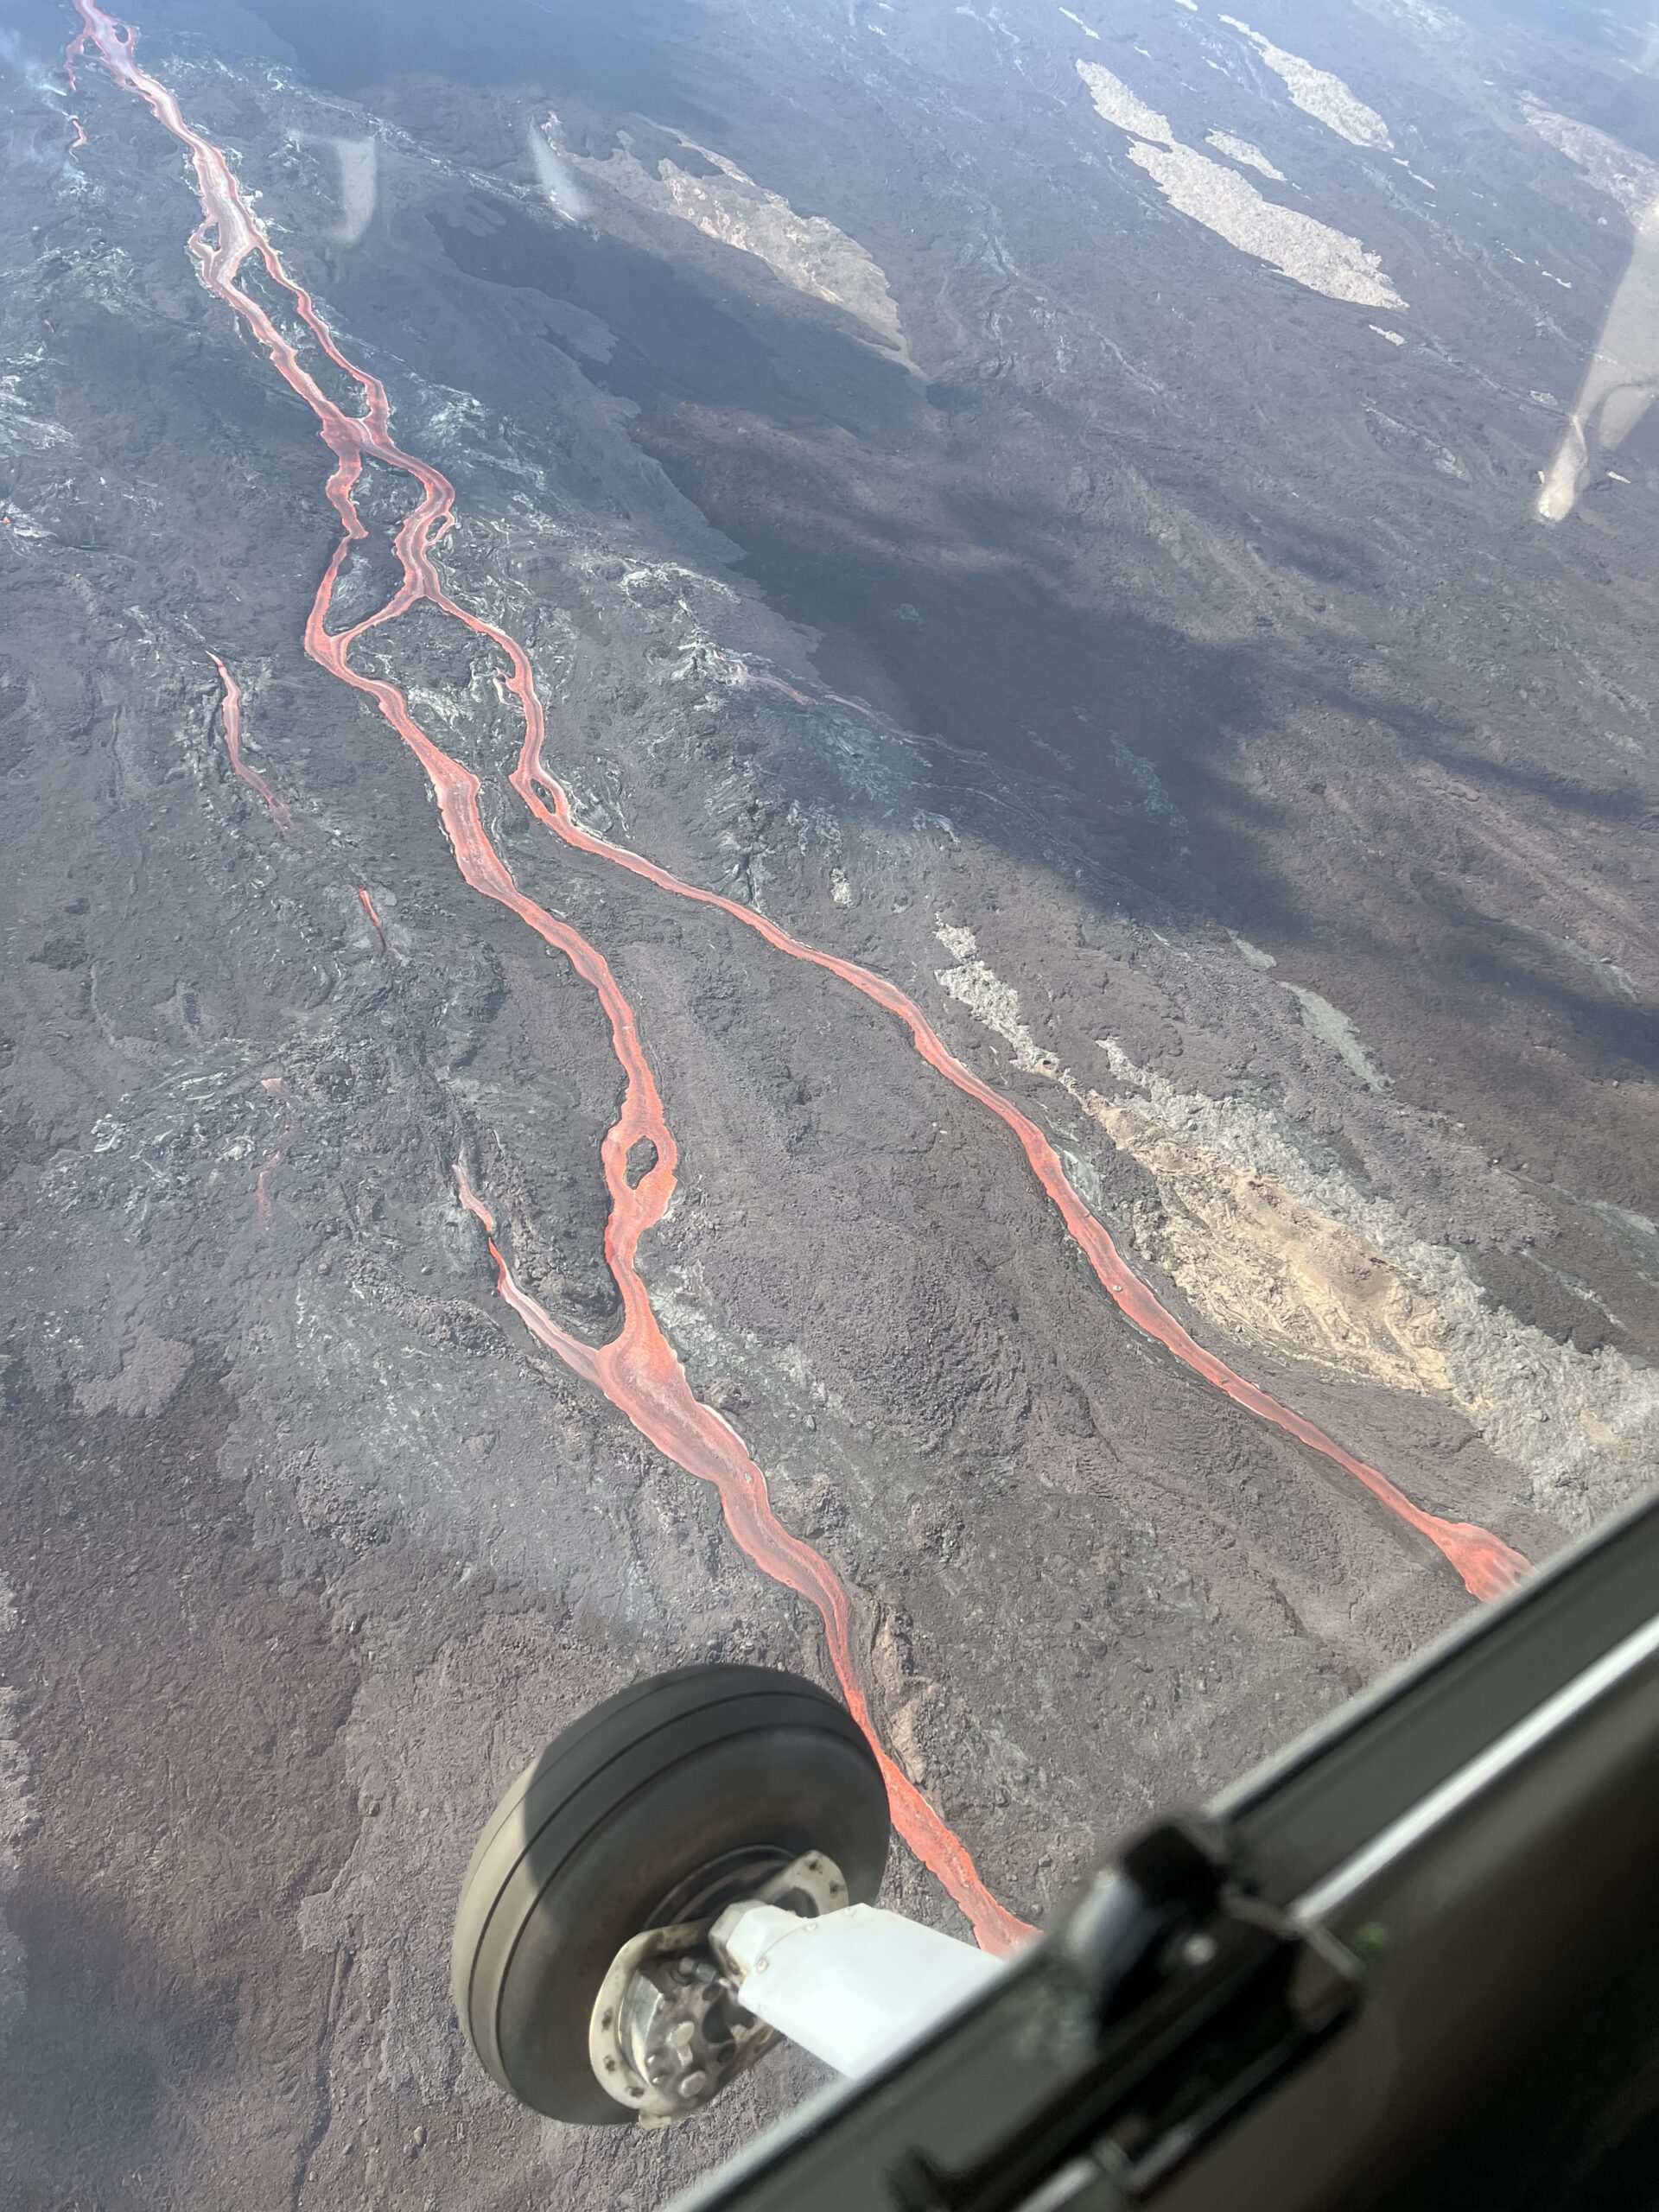 Mauna Loa latest lava flows from Fissure 3 …….Dec 2022 activity!